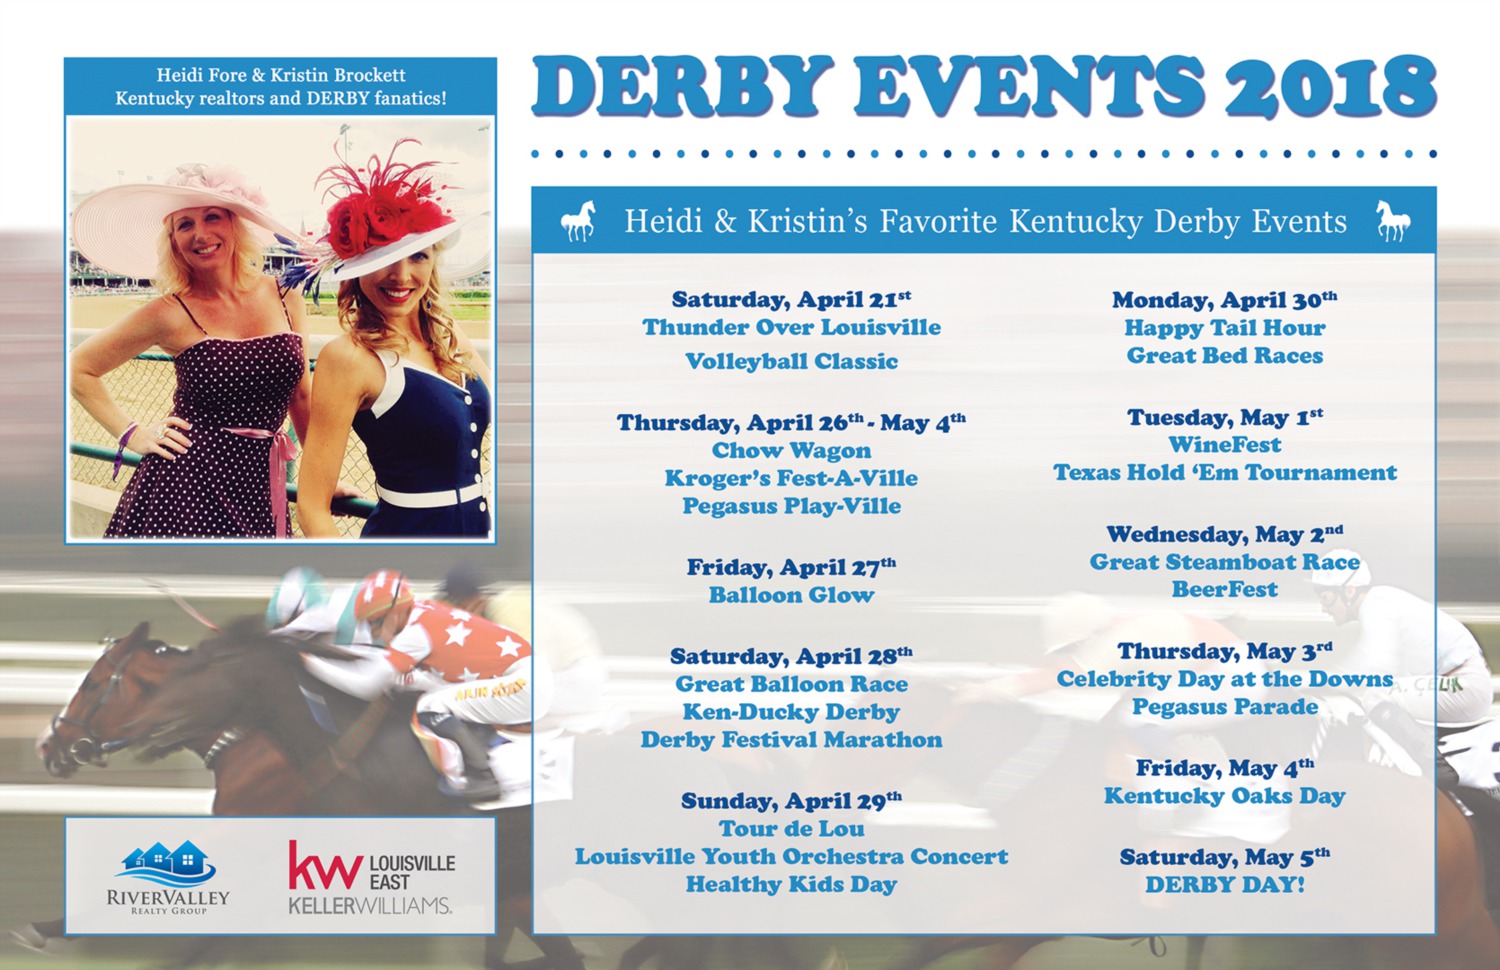 2018 Kentucky Derby events! Dates, locations, and times!